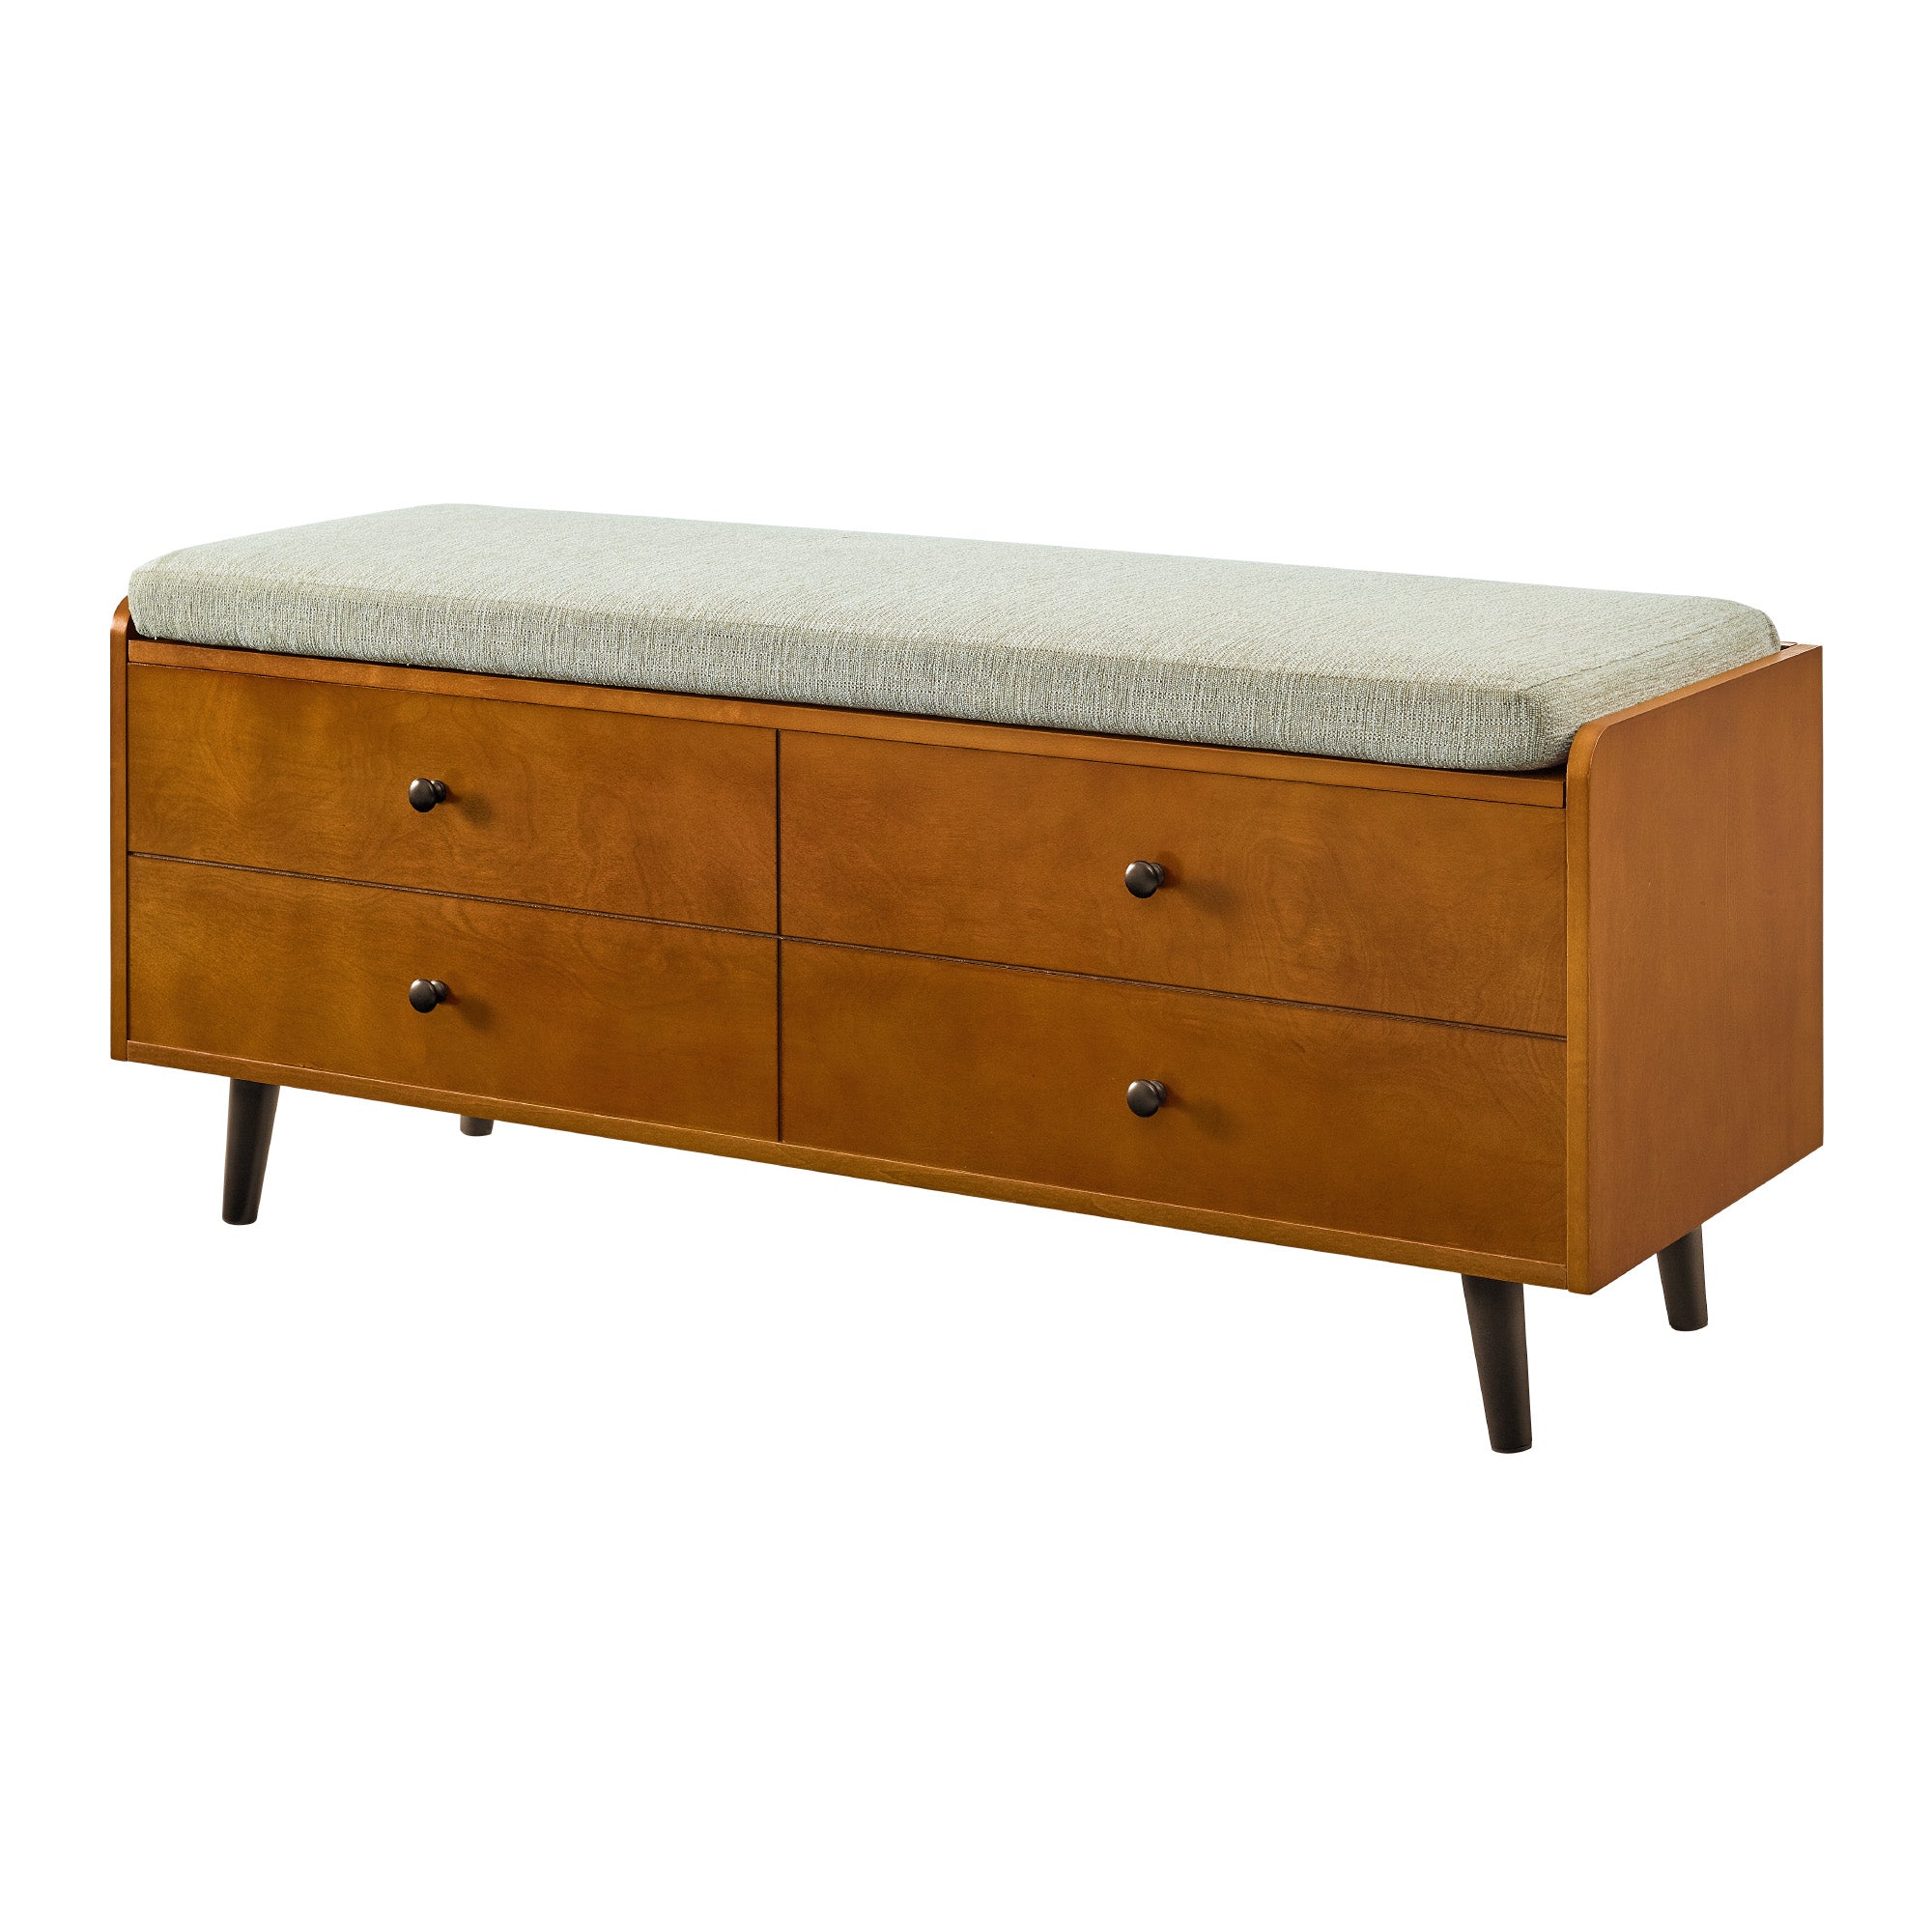 46" Mid Century Storage Bench with Cushion - East Shore Modern Home Furnishings